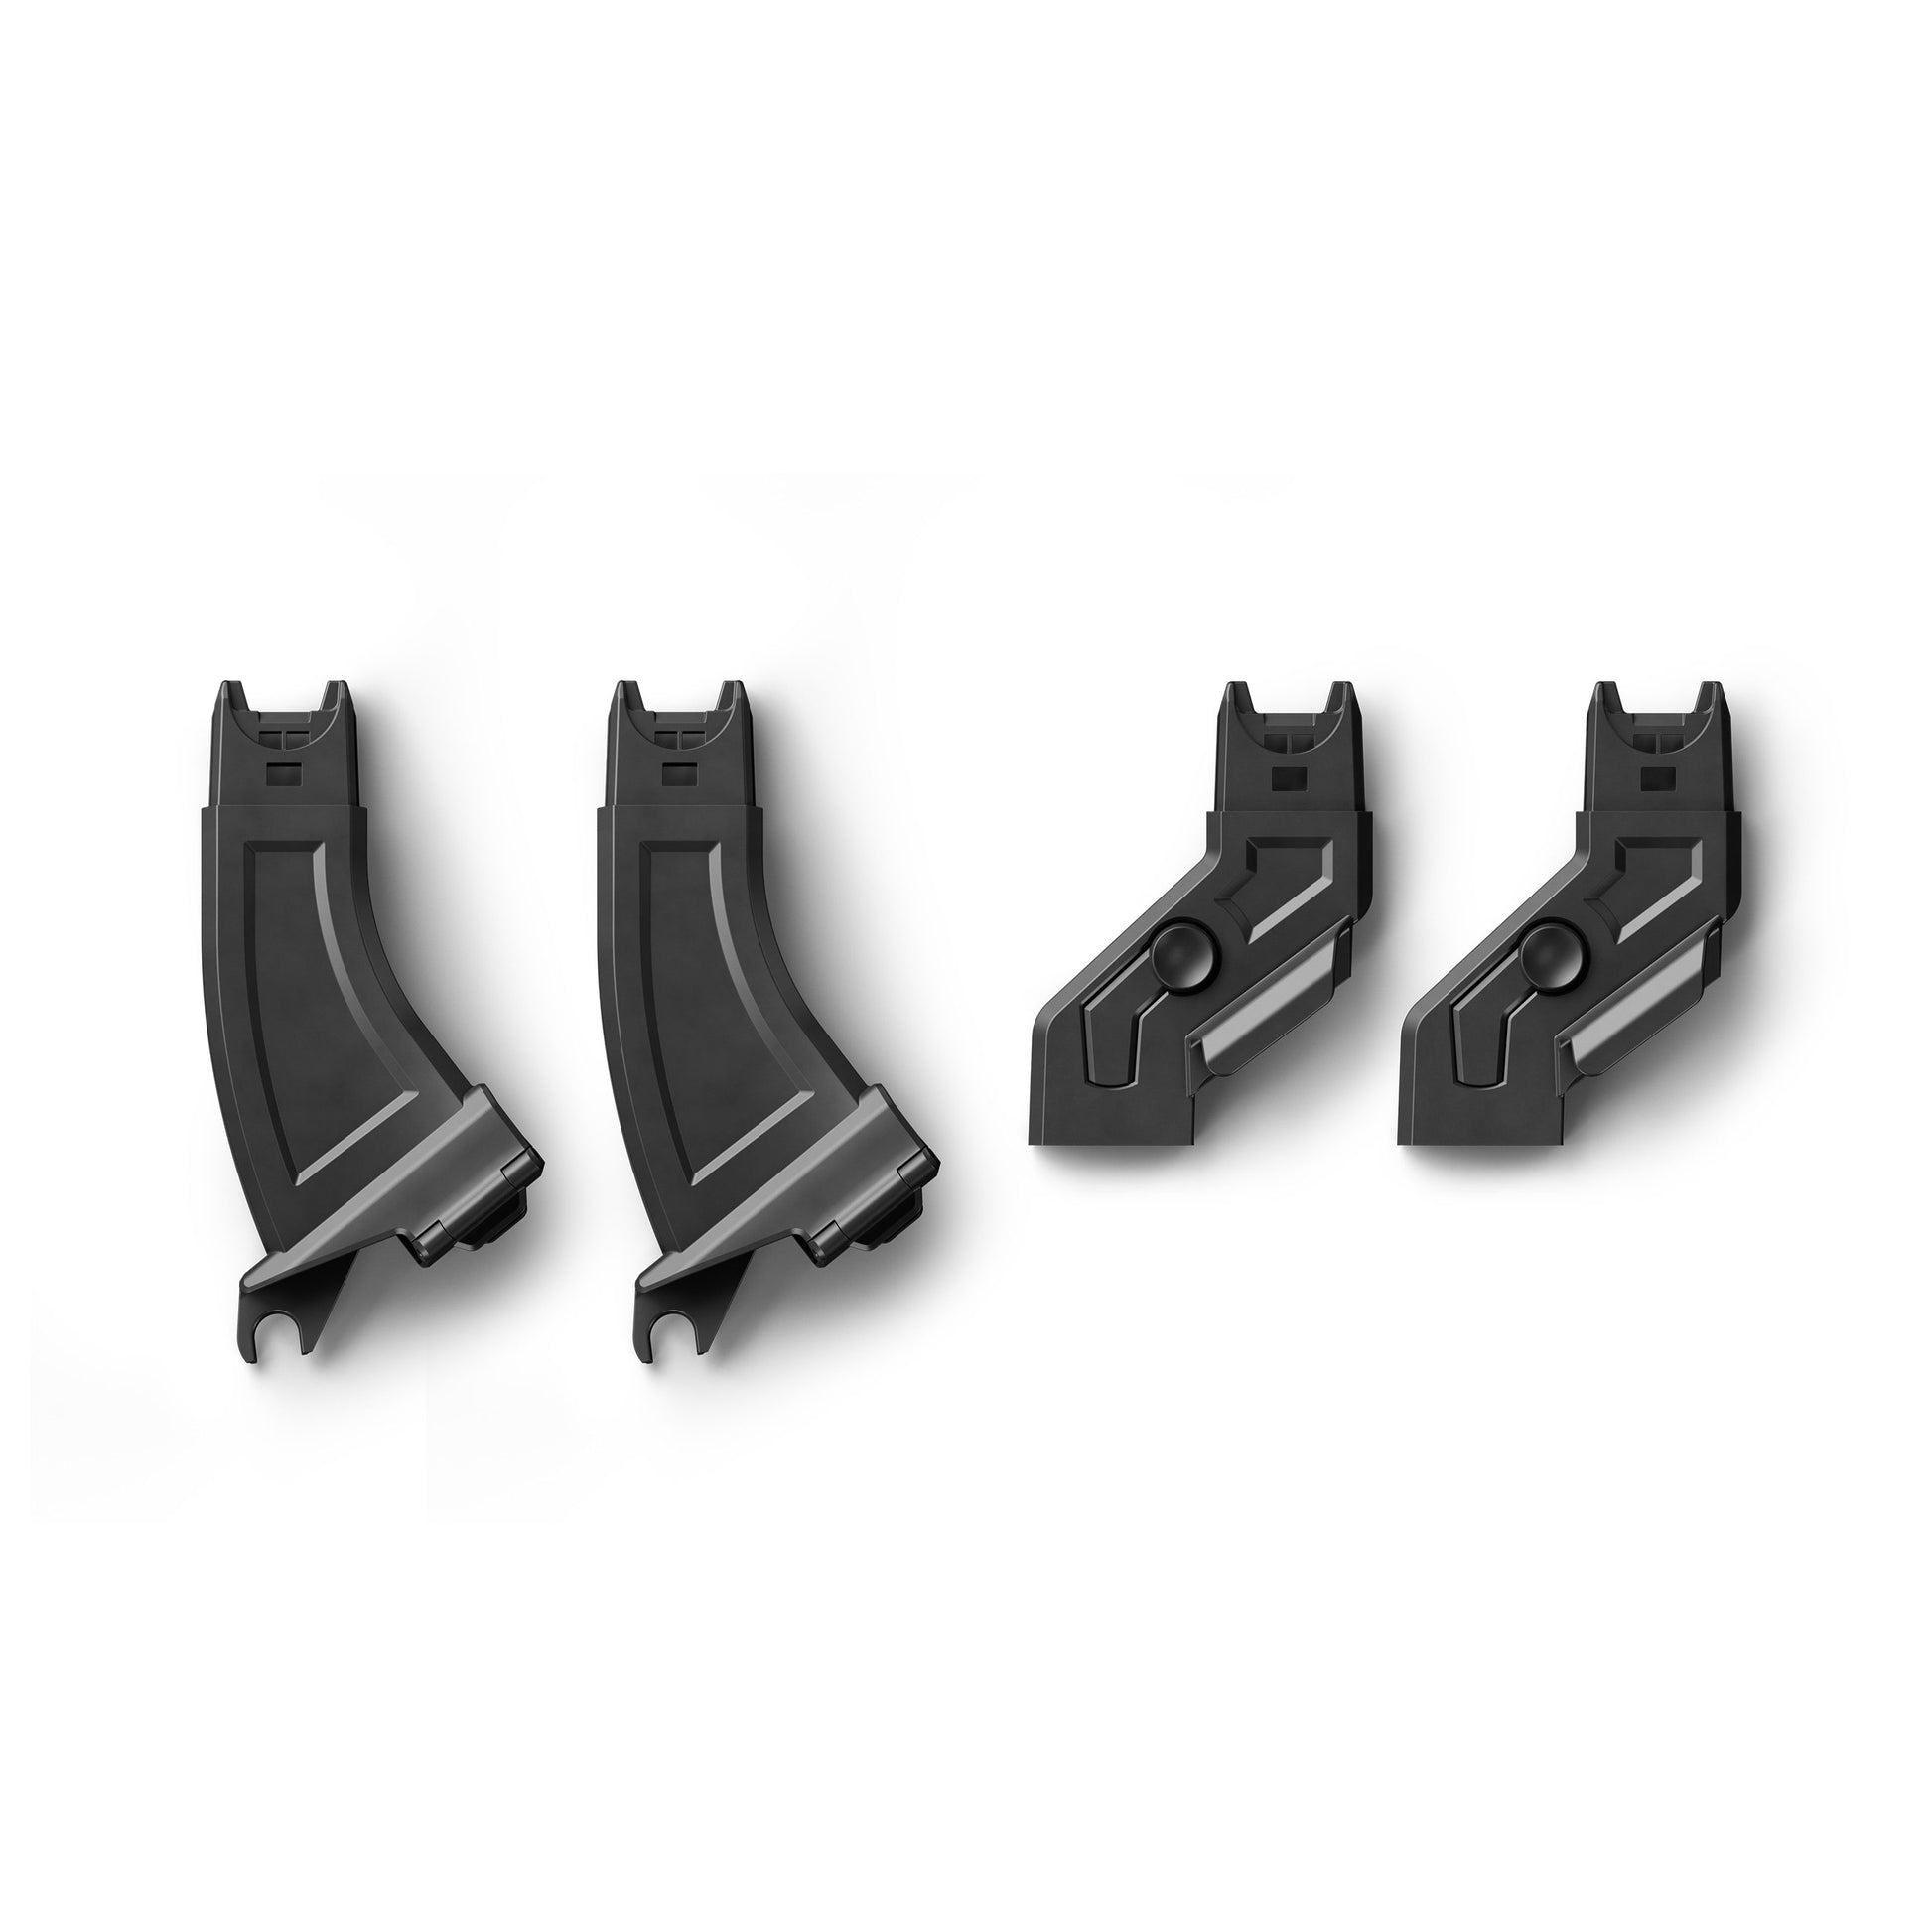 Veer Switchback Second Seat Adapter Kit | The Baby Cubby